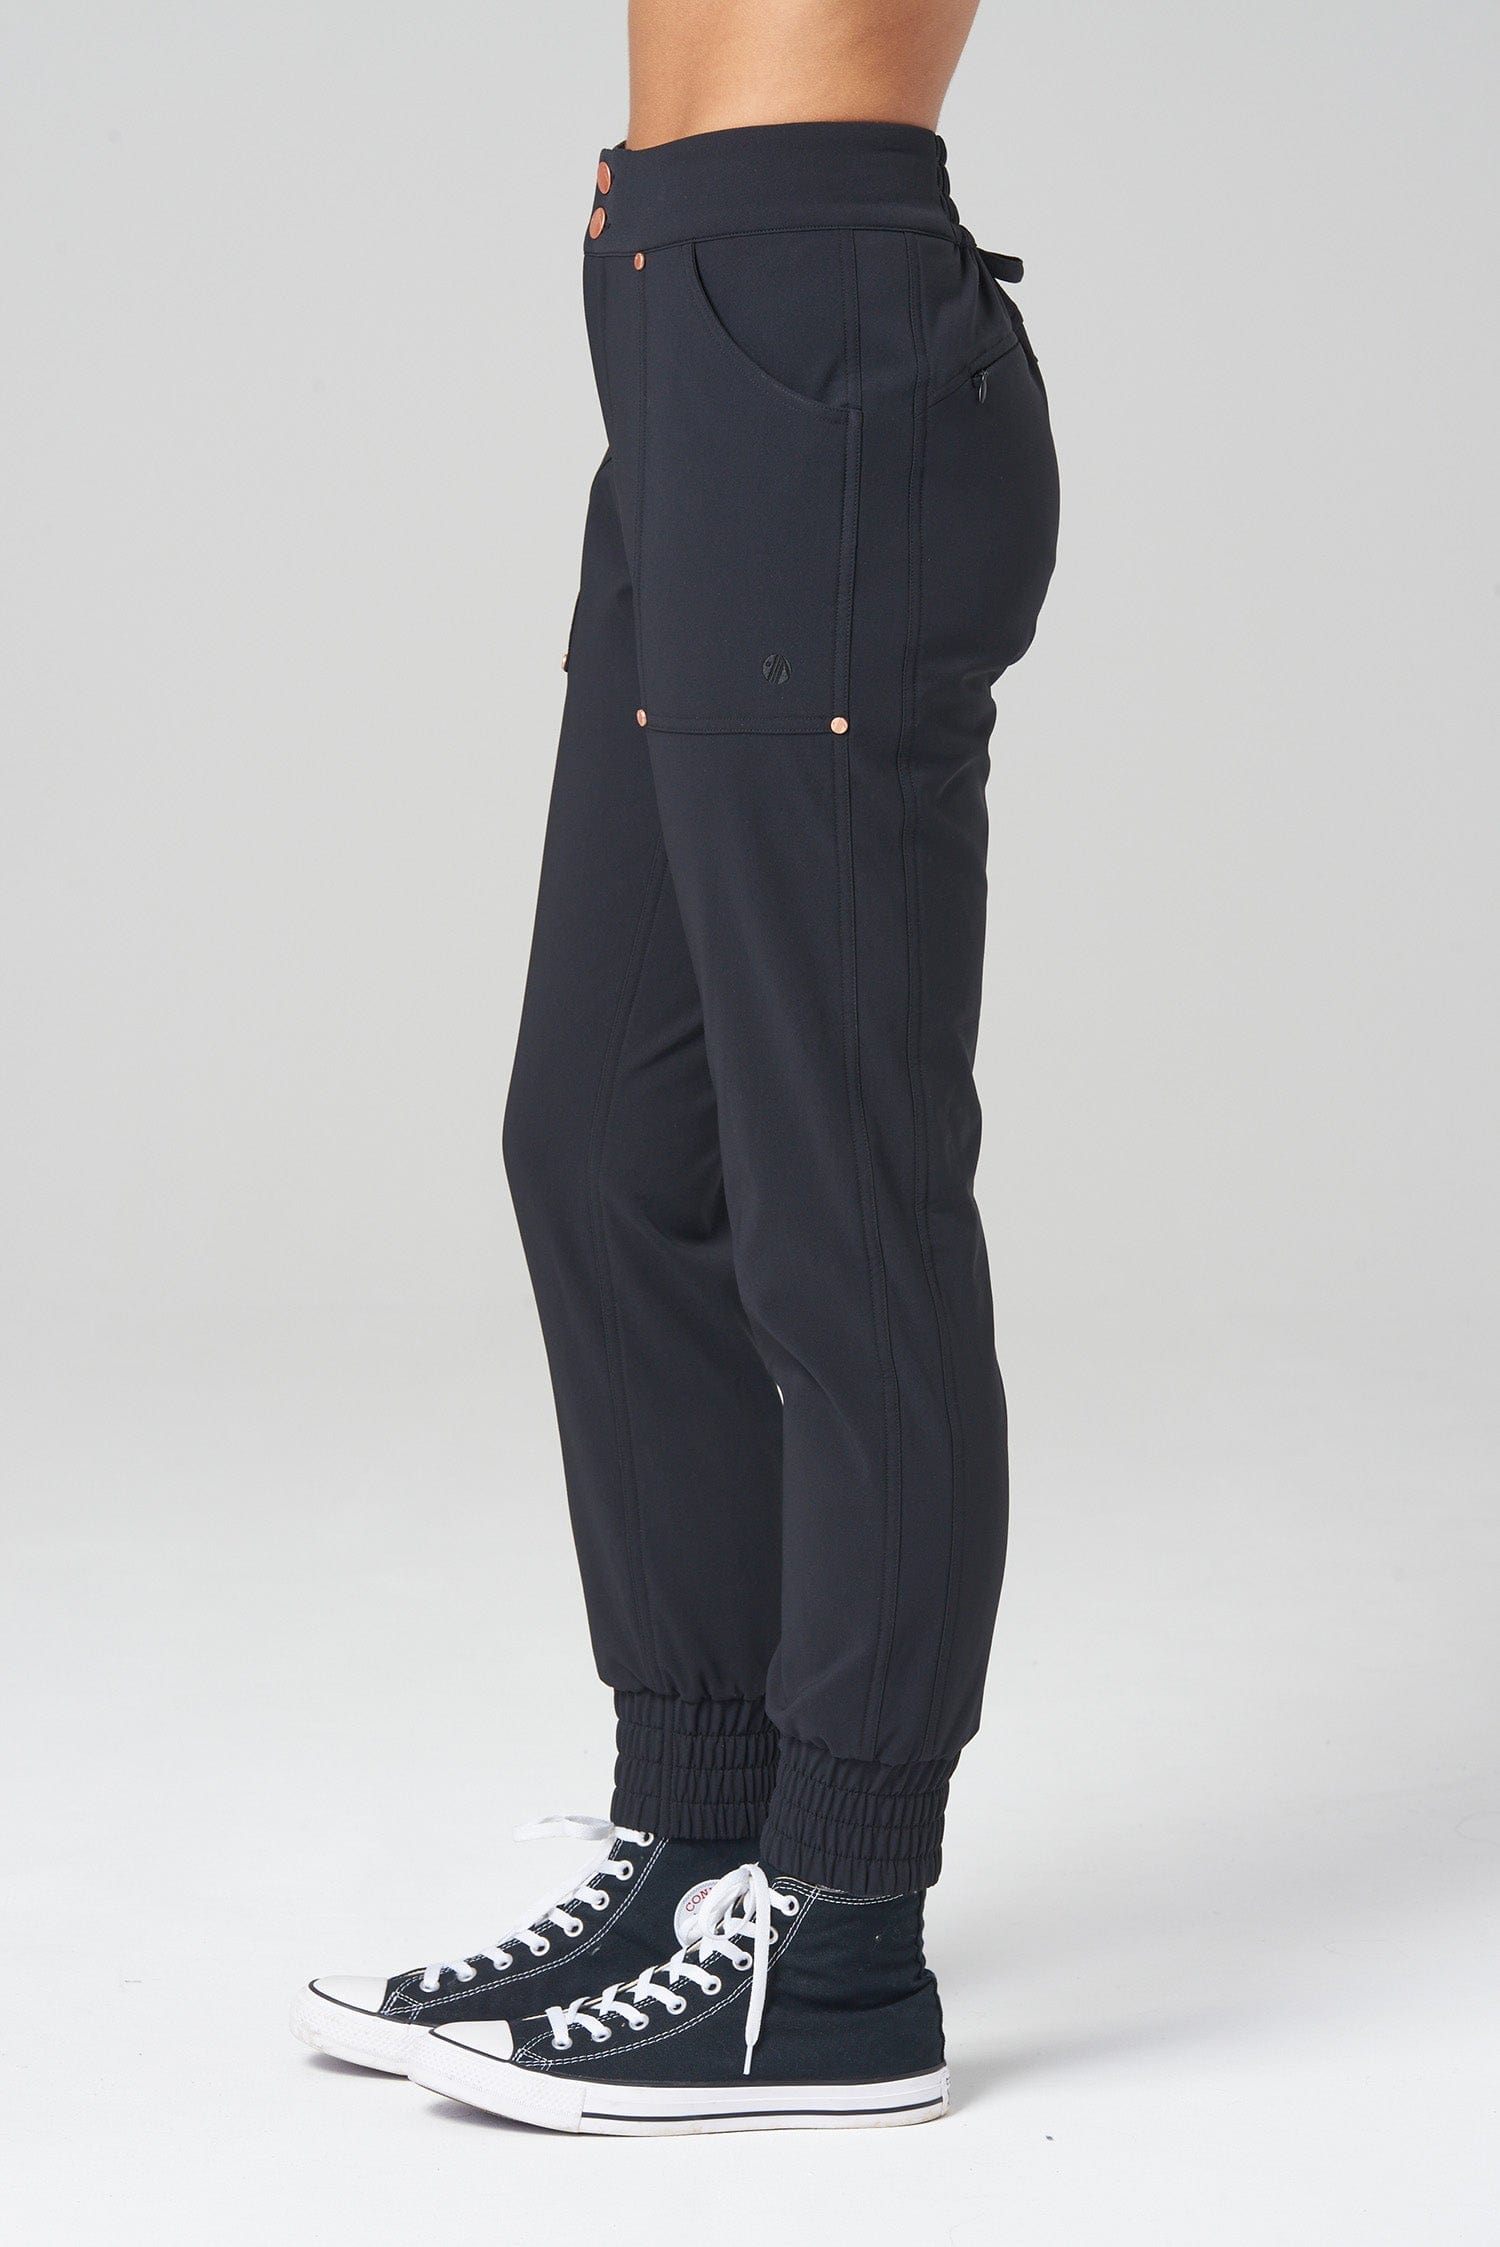 Thermal Casual Stroll Pants - Black Trousers  